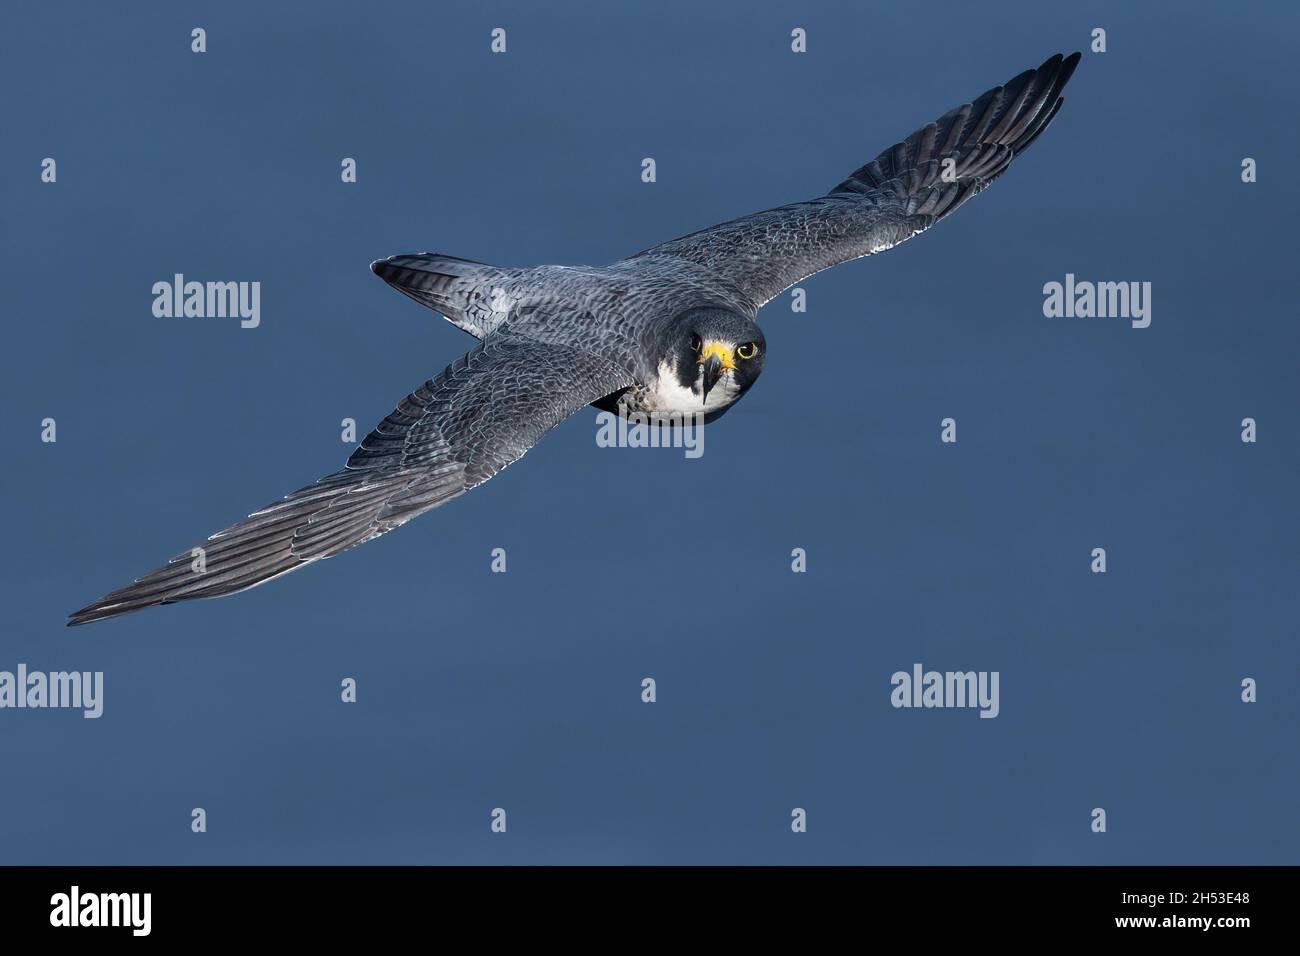 Peregrine falcon in flight - dorsal view with eye contact Stock Photo